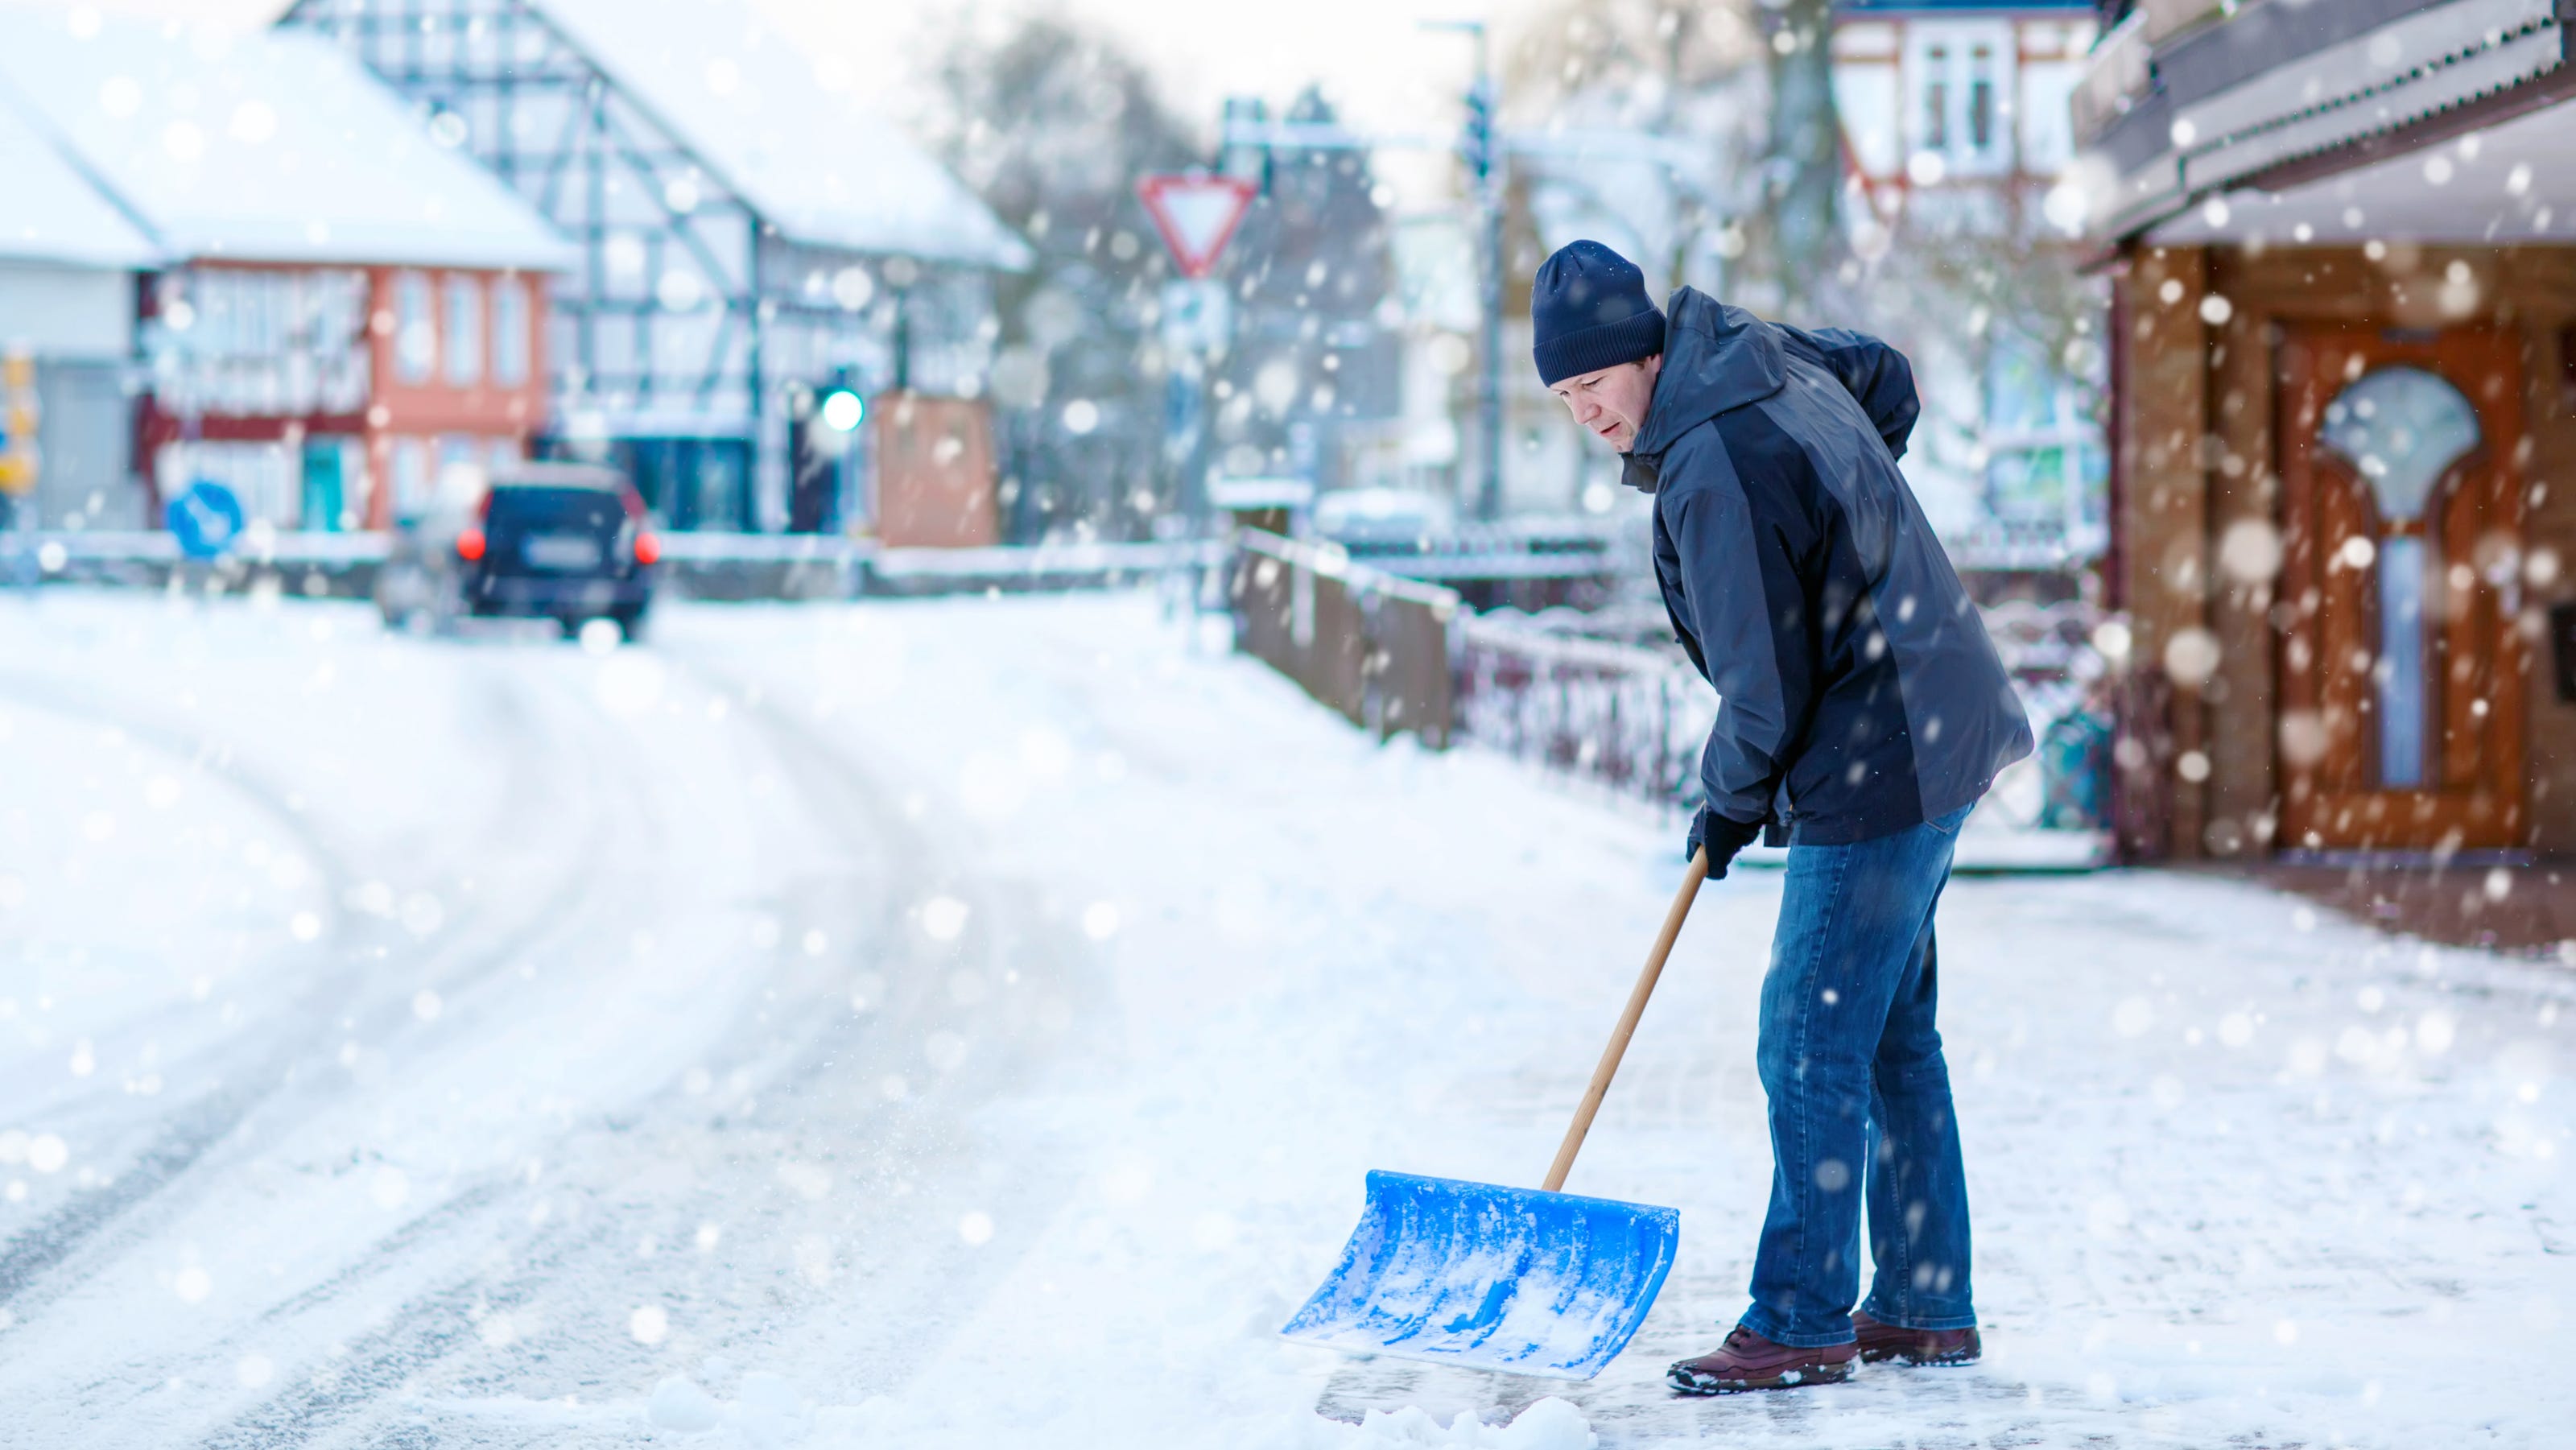 Shoveling Snow Wrong Could Be Dangerous Here s What You Need To Know